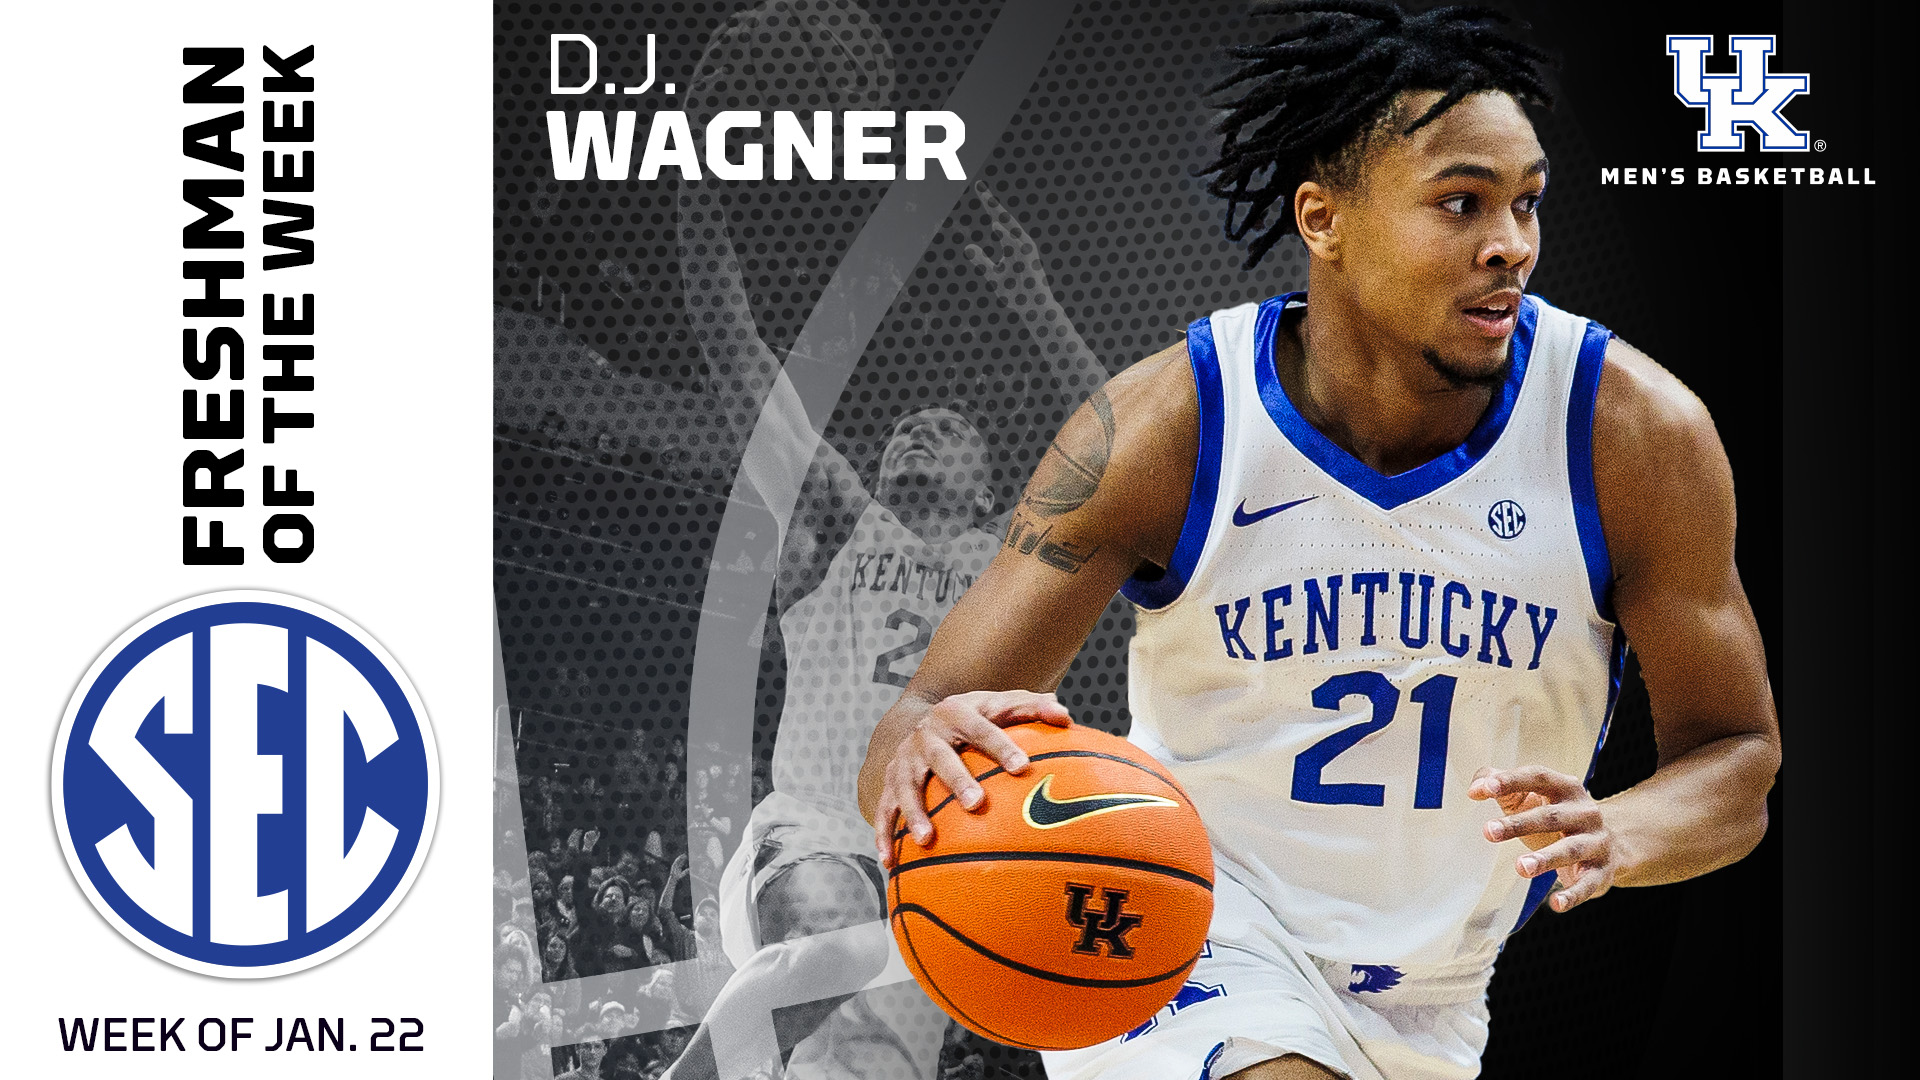 D.J. Wagner Named SEC Freshman of the Week for Third Time